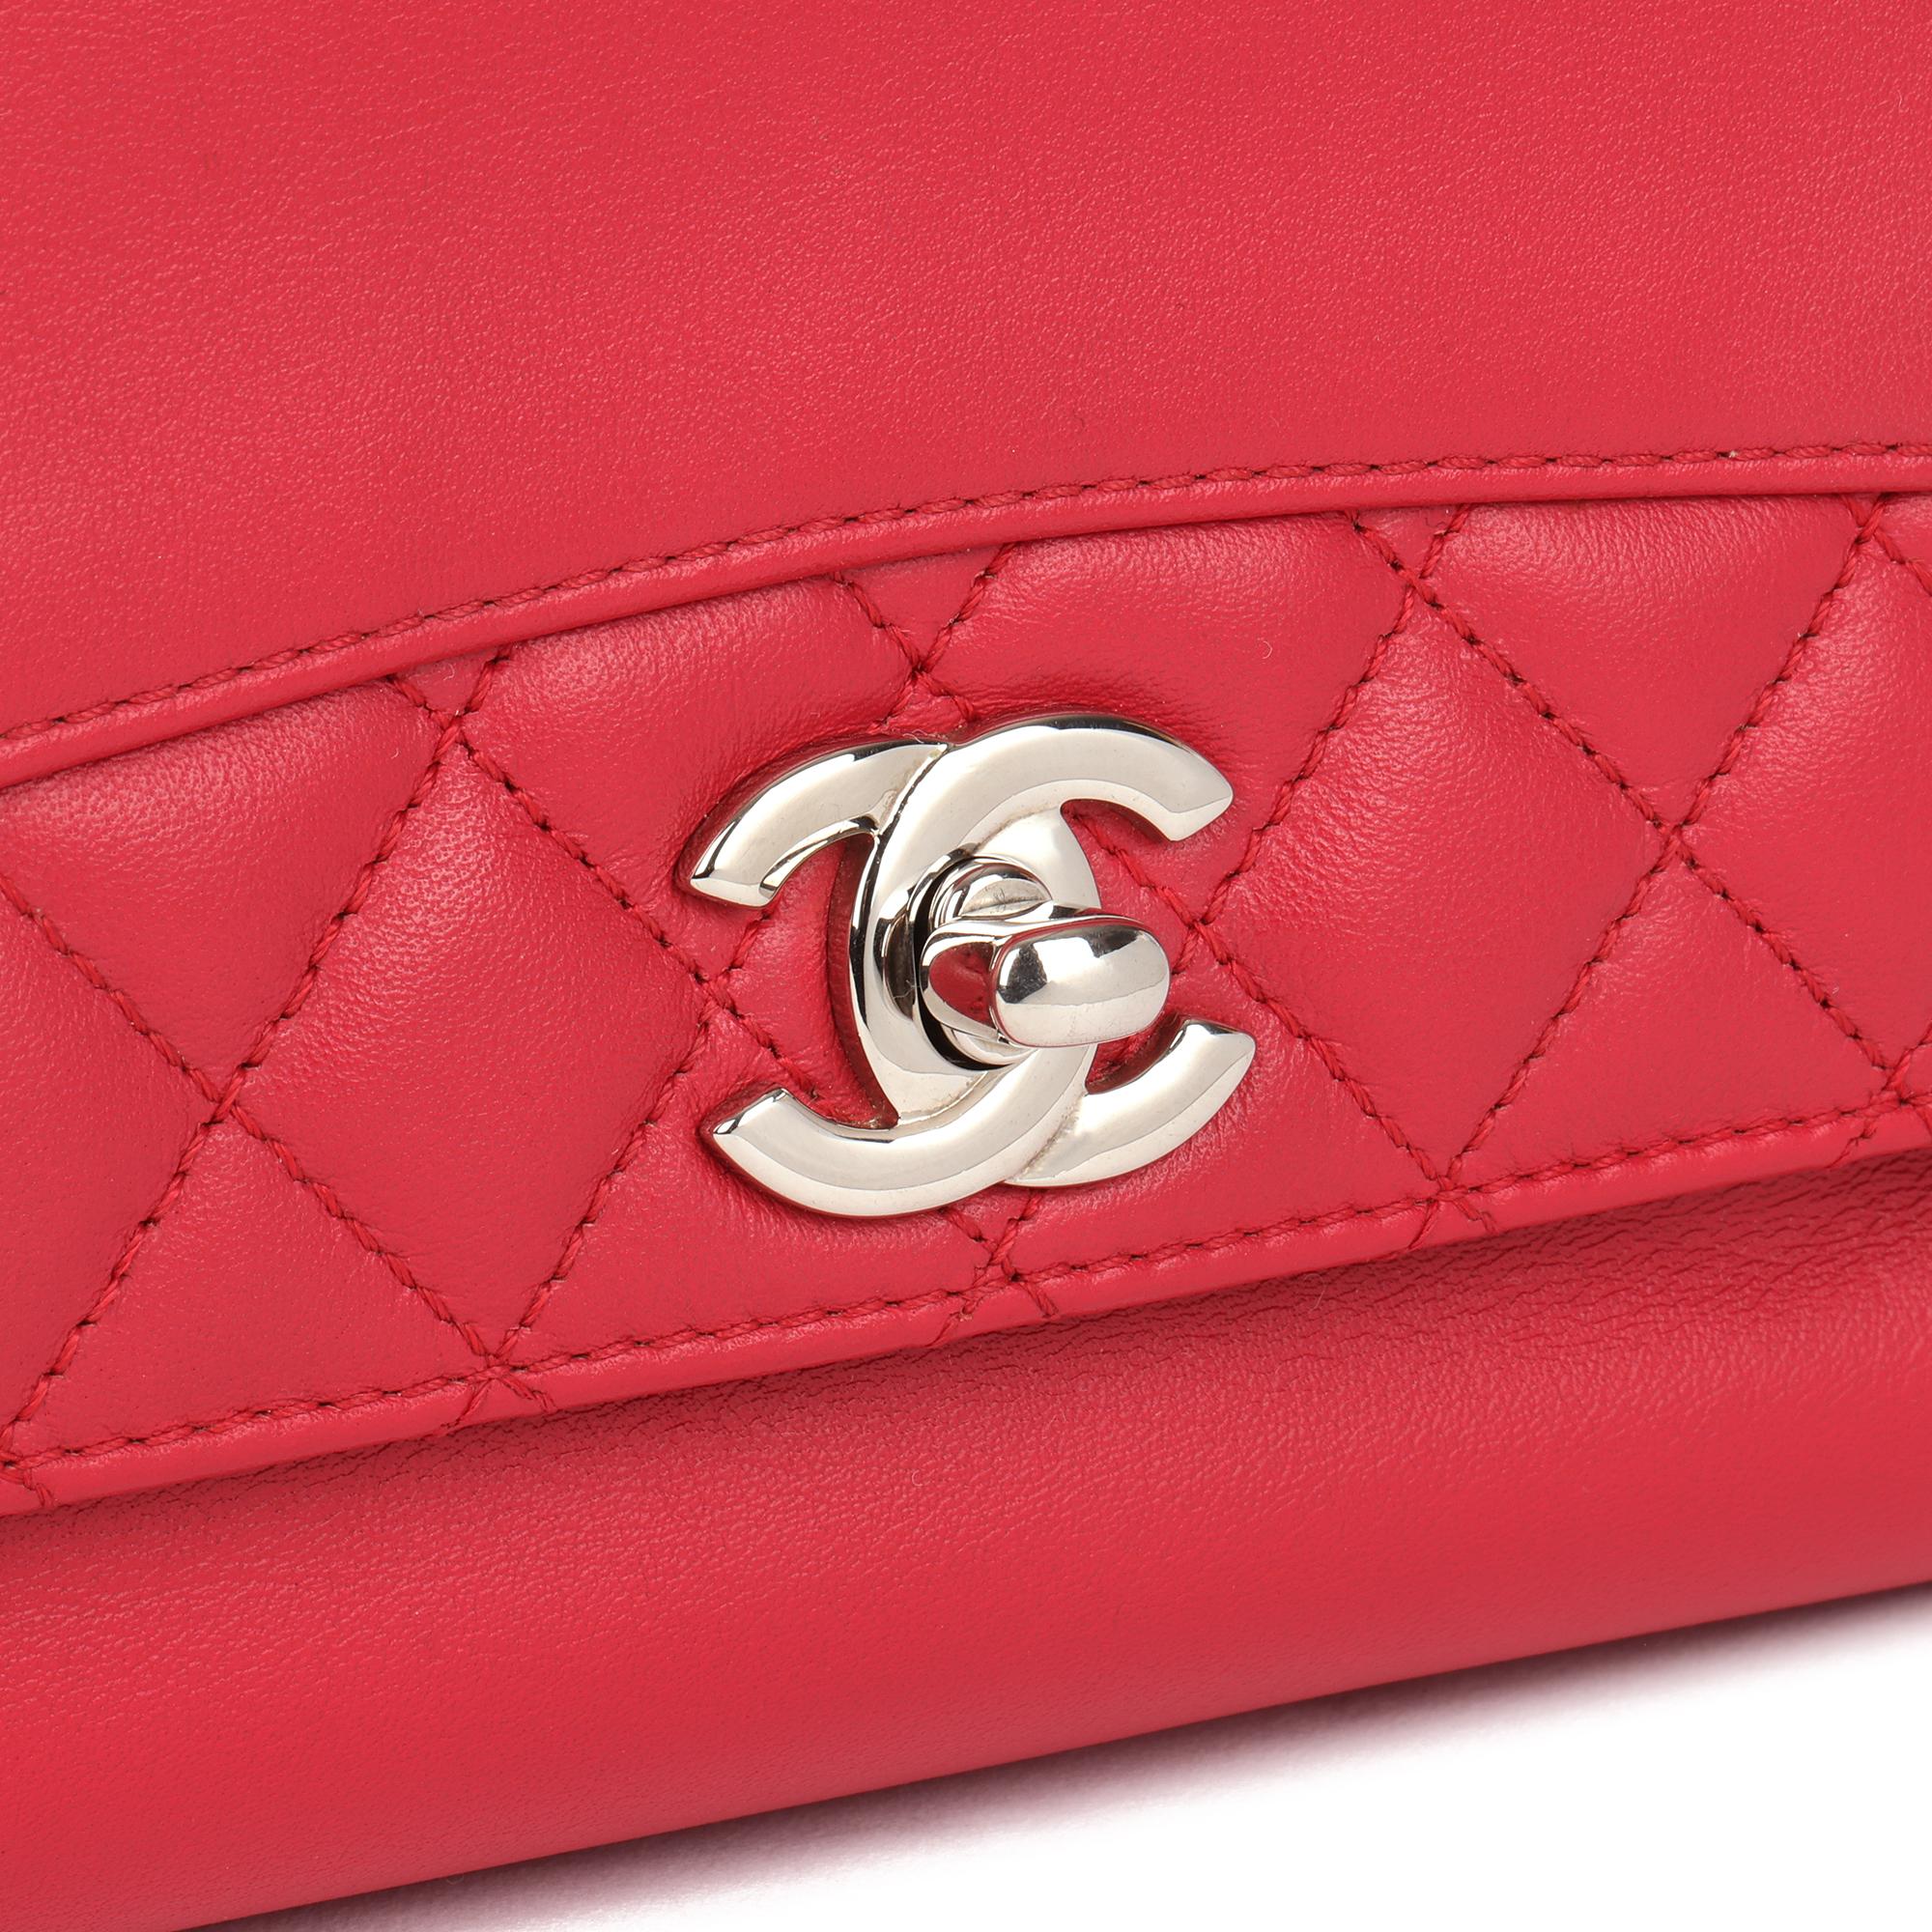 CHANEL
Red Reverso Quilted Lambskin Classic Single Flap Bag

Xupes Reference: HB4006
Serial Number: 22284917
Age (Circa): 2016
Accompanied By: Chanel Dust Bag, Protective Felt, Authenticity Card
Authenticity Details: Authenticity Card, Serial